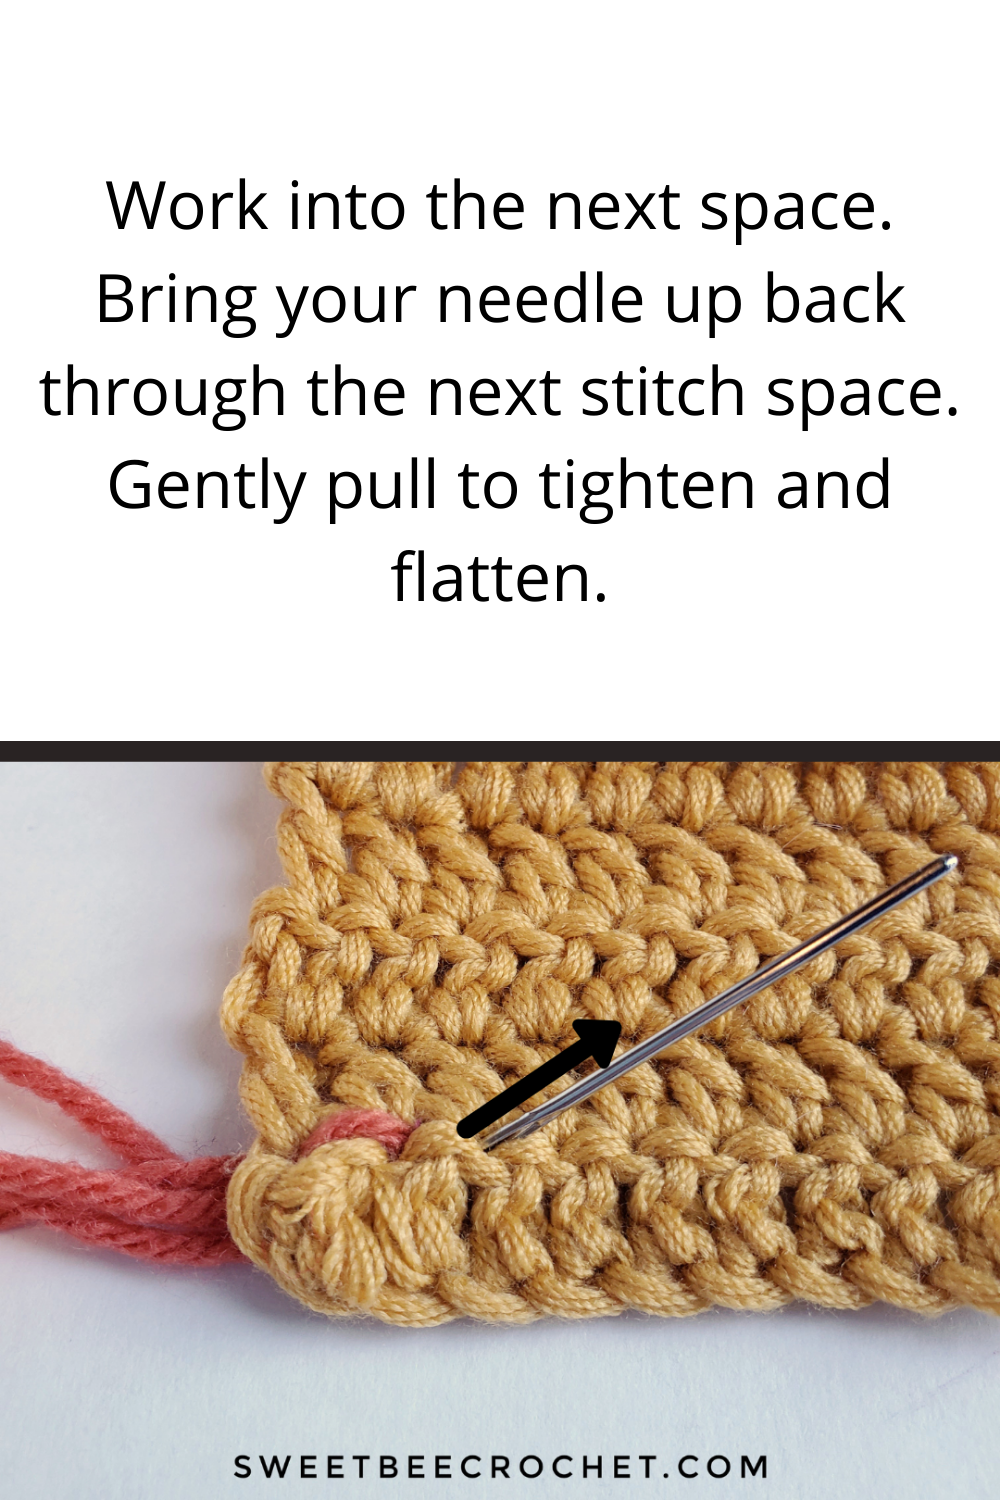 How To Use A Back Stitch In Crochet - Sweet Bee Crochet